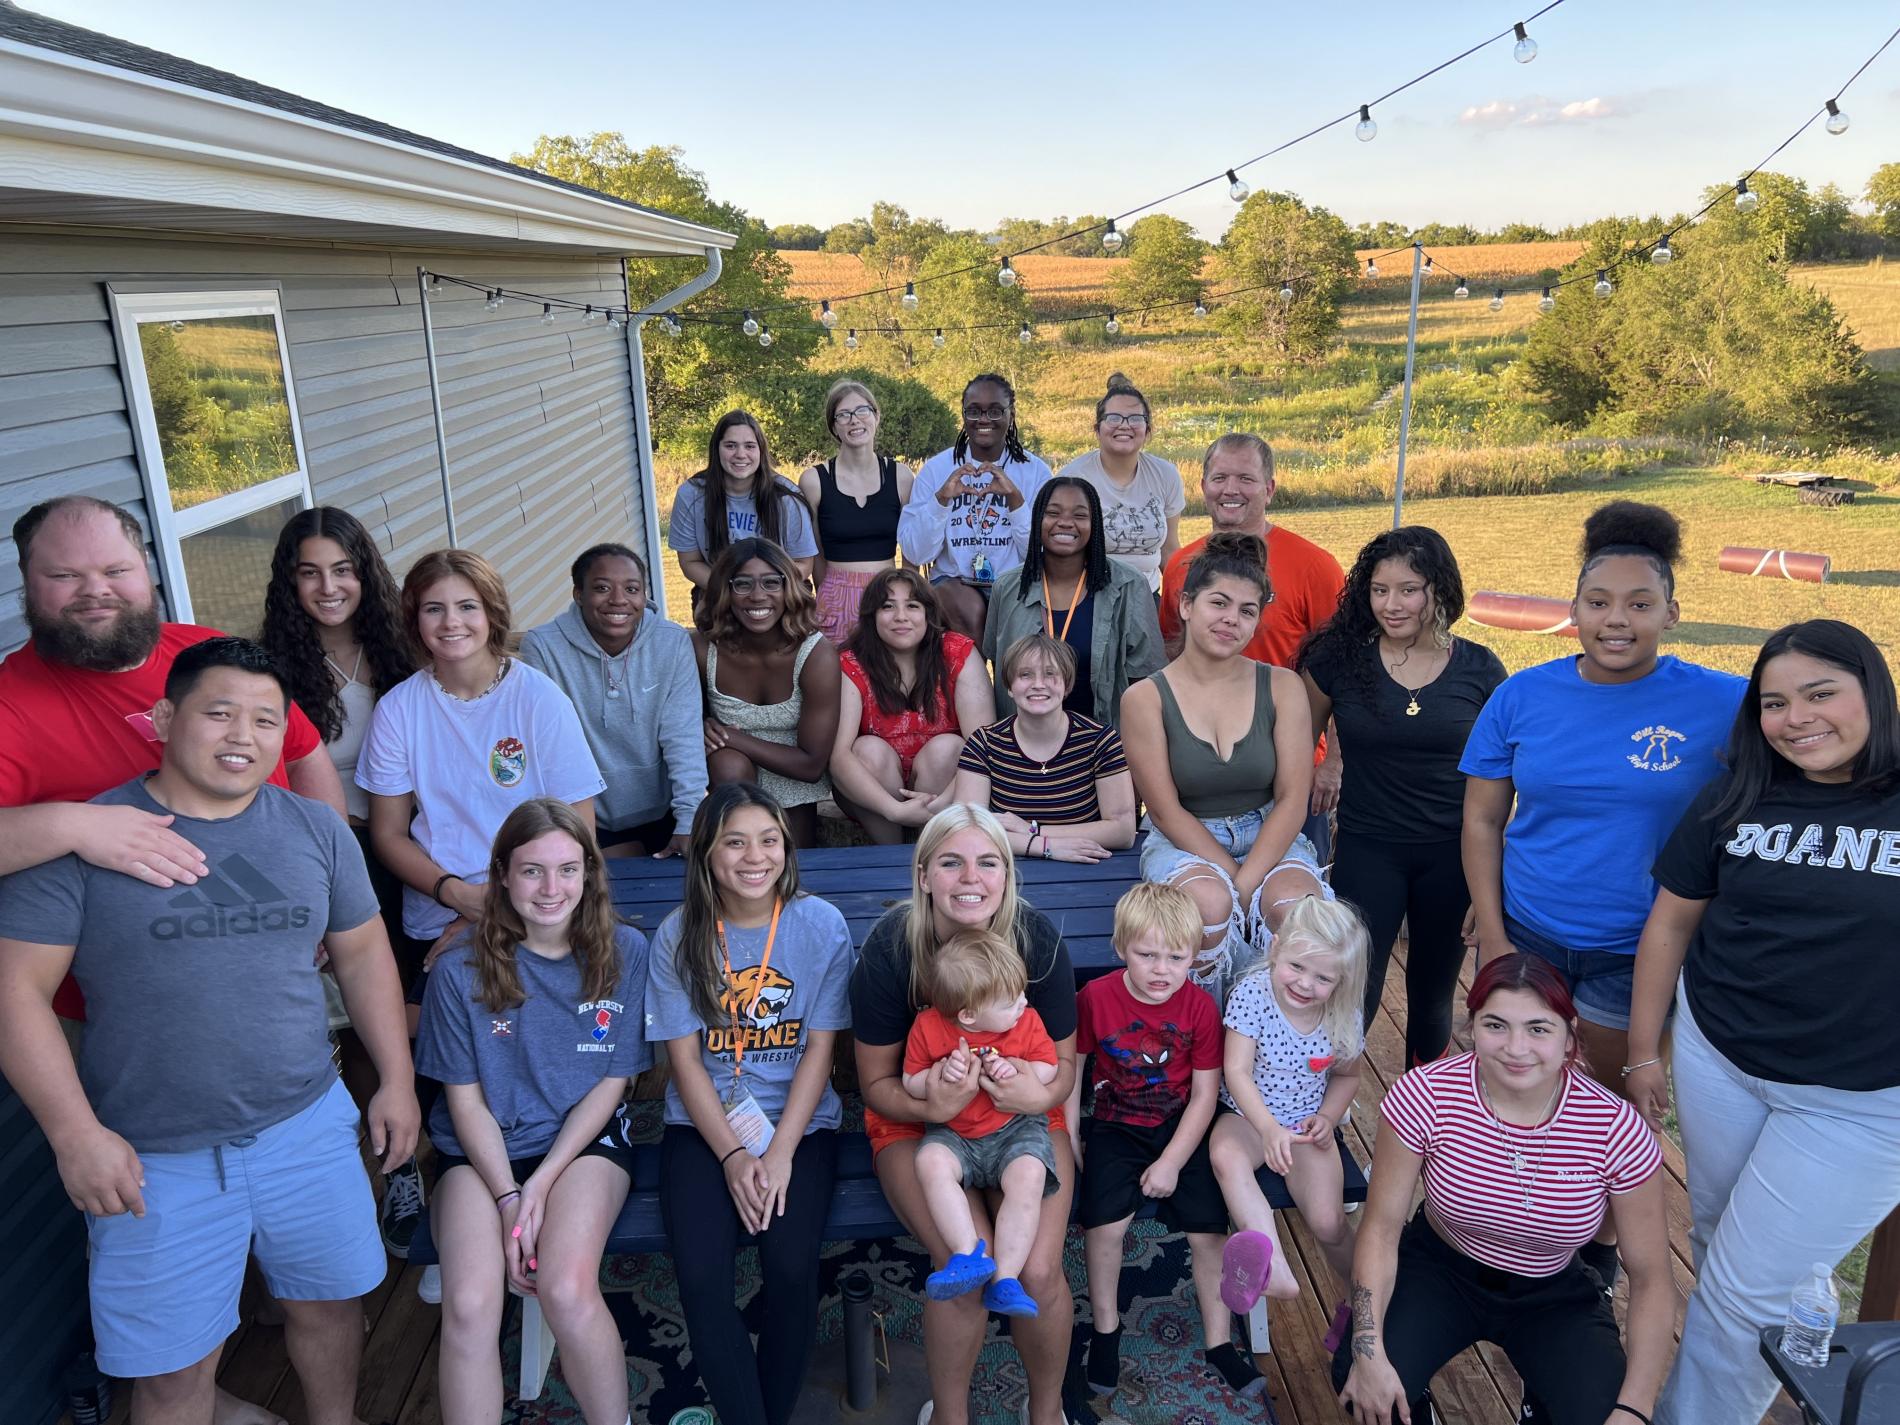 The inaugural women’s wrestling team gathered for a cookout at Dana Vote’s house (Doane Director of Wrestling and men’s head wrestling coach).